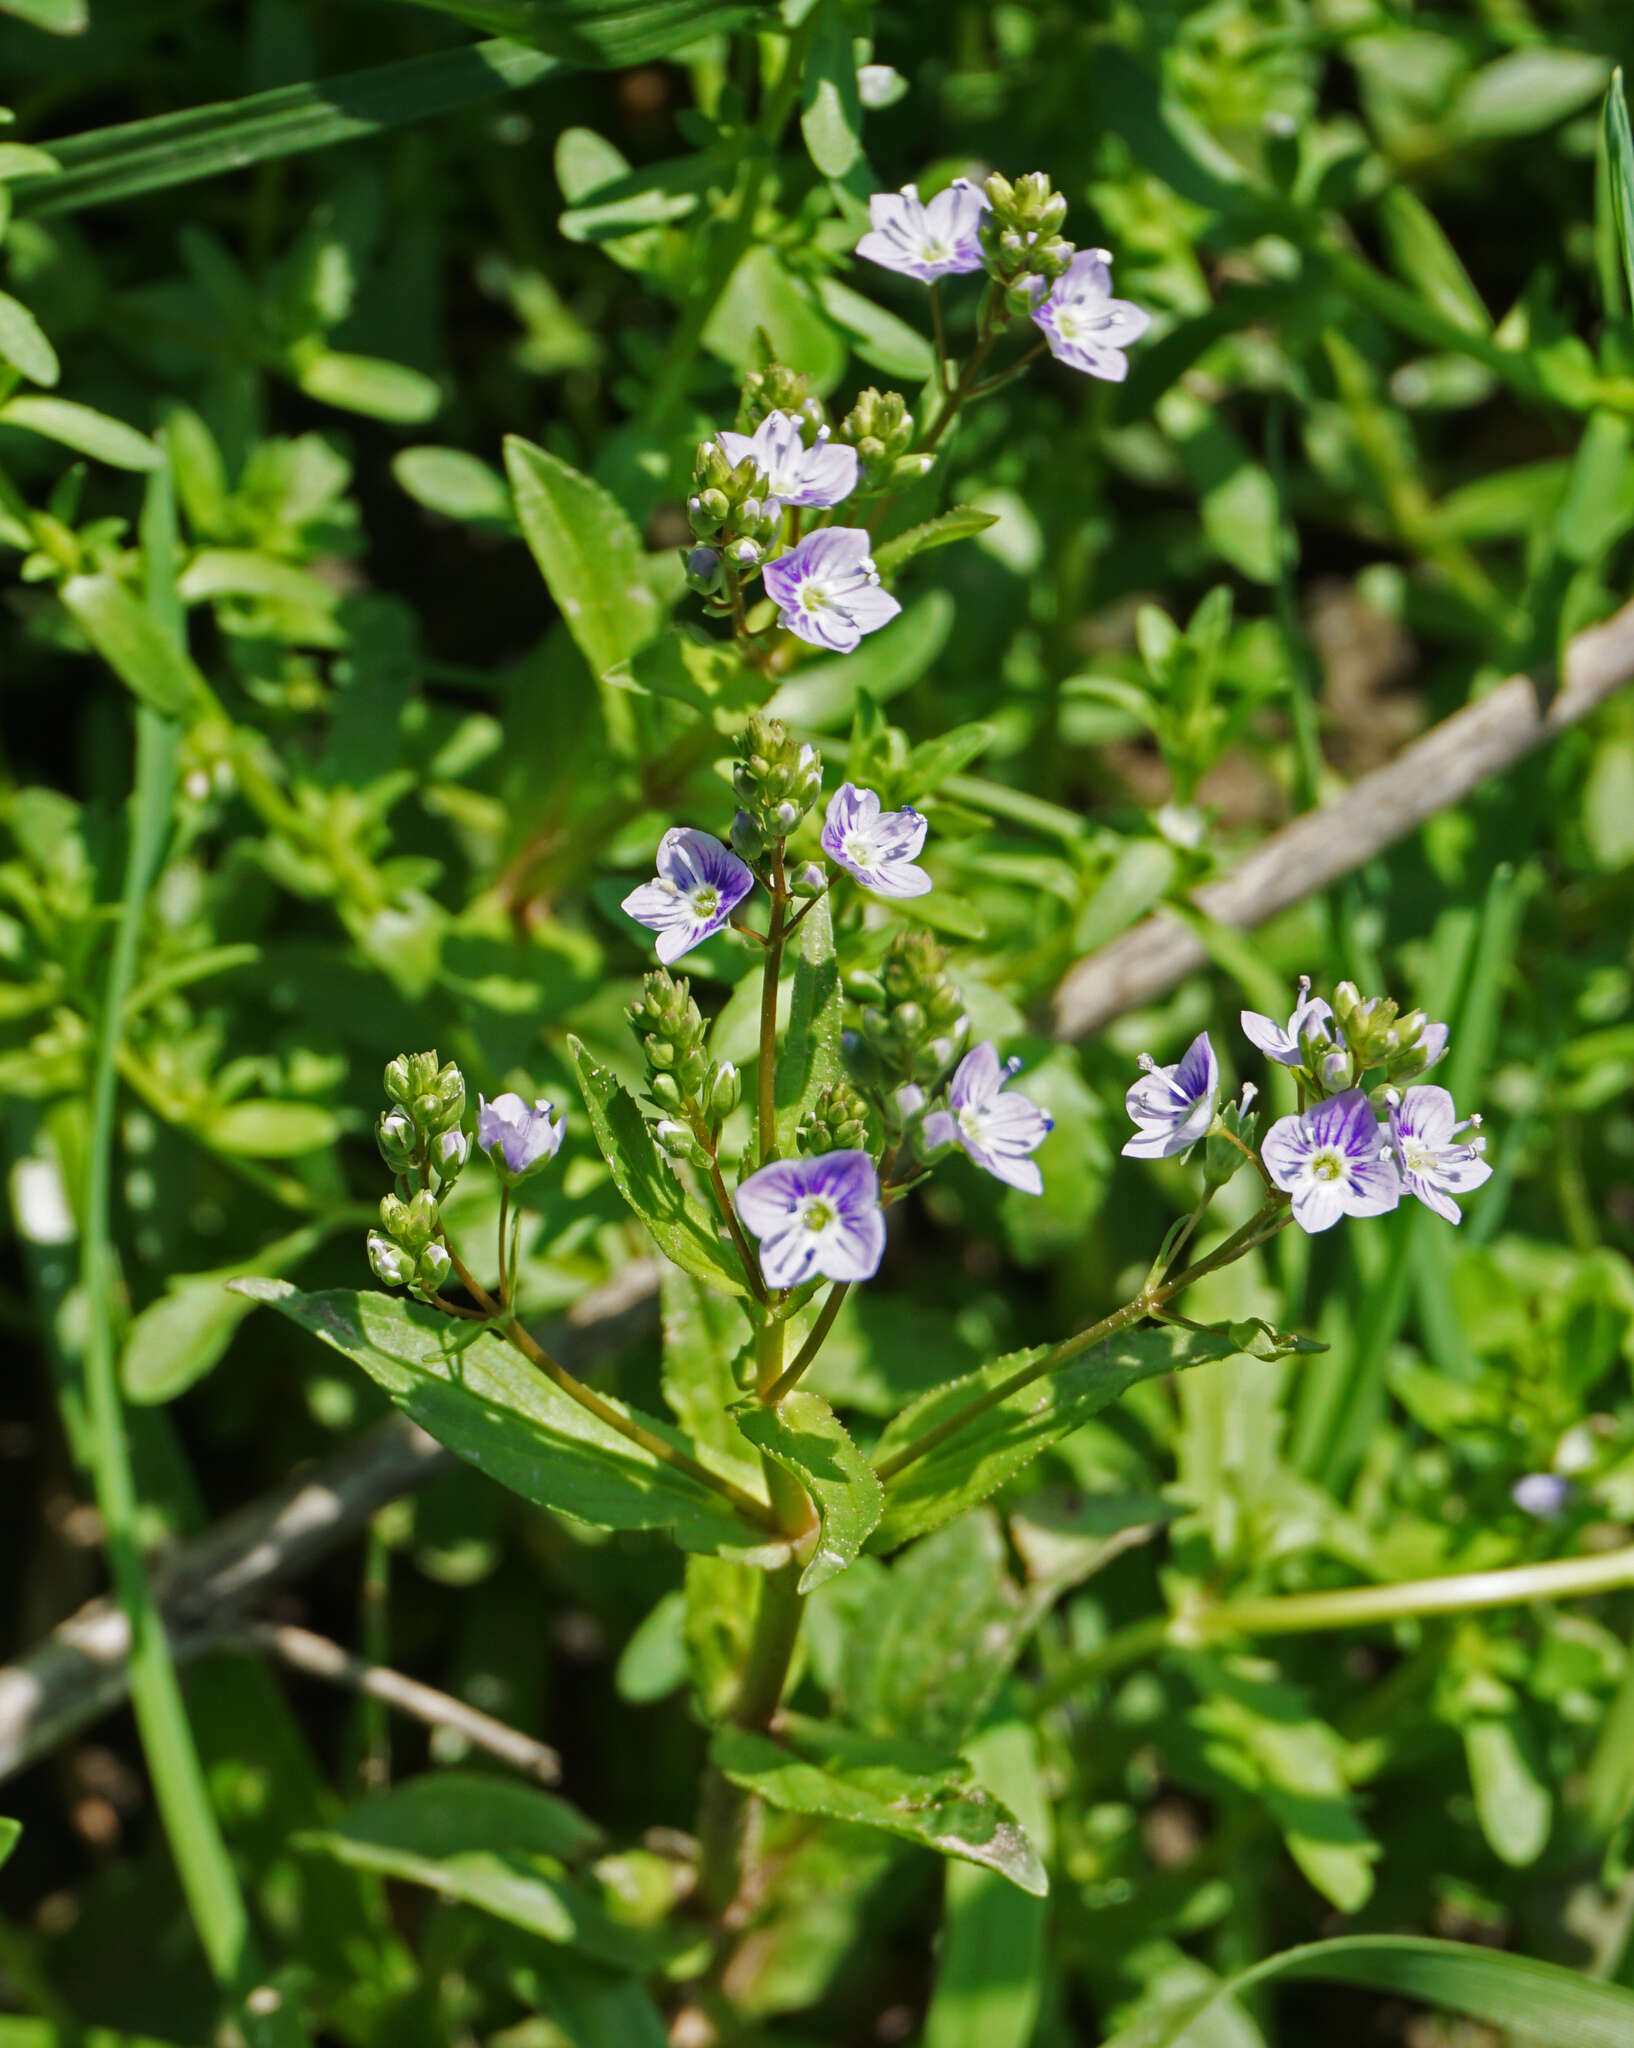 Image of Blue Water-speedwell